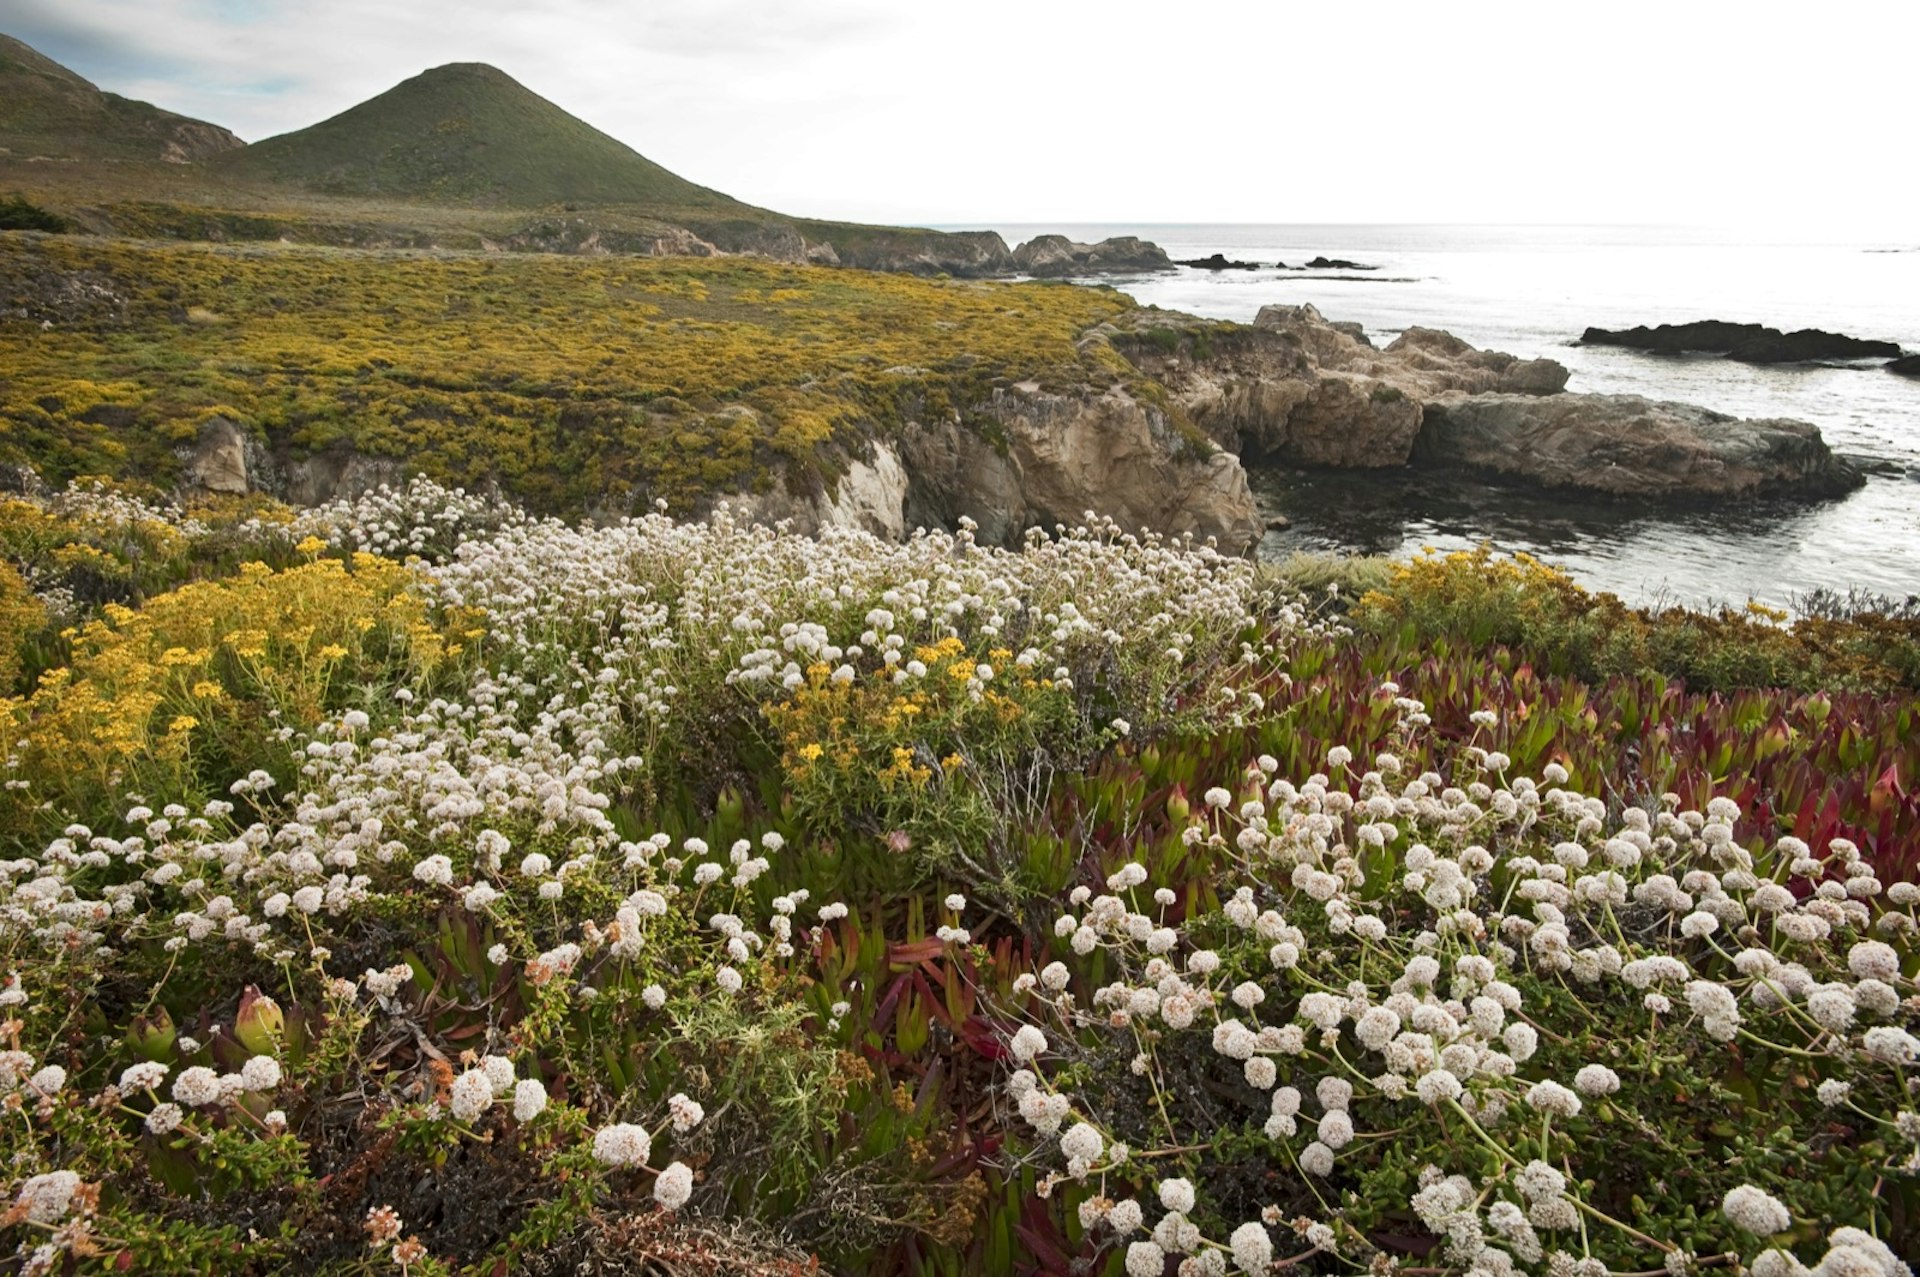 Garrapata State Park is known for wildflowers and gorgous coastal views one of the many reasons it is a filming location in Big Little Lies